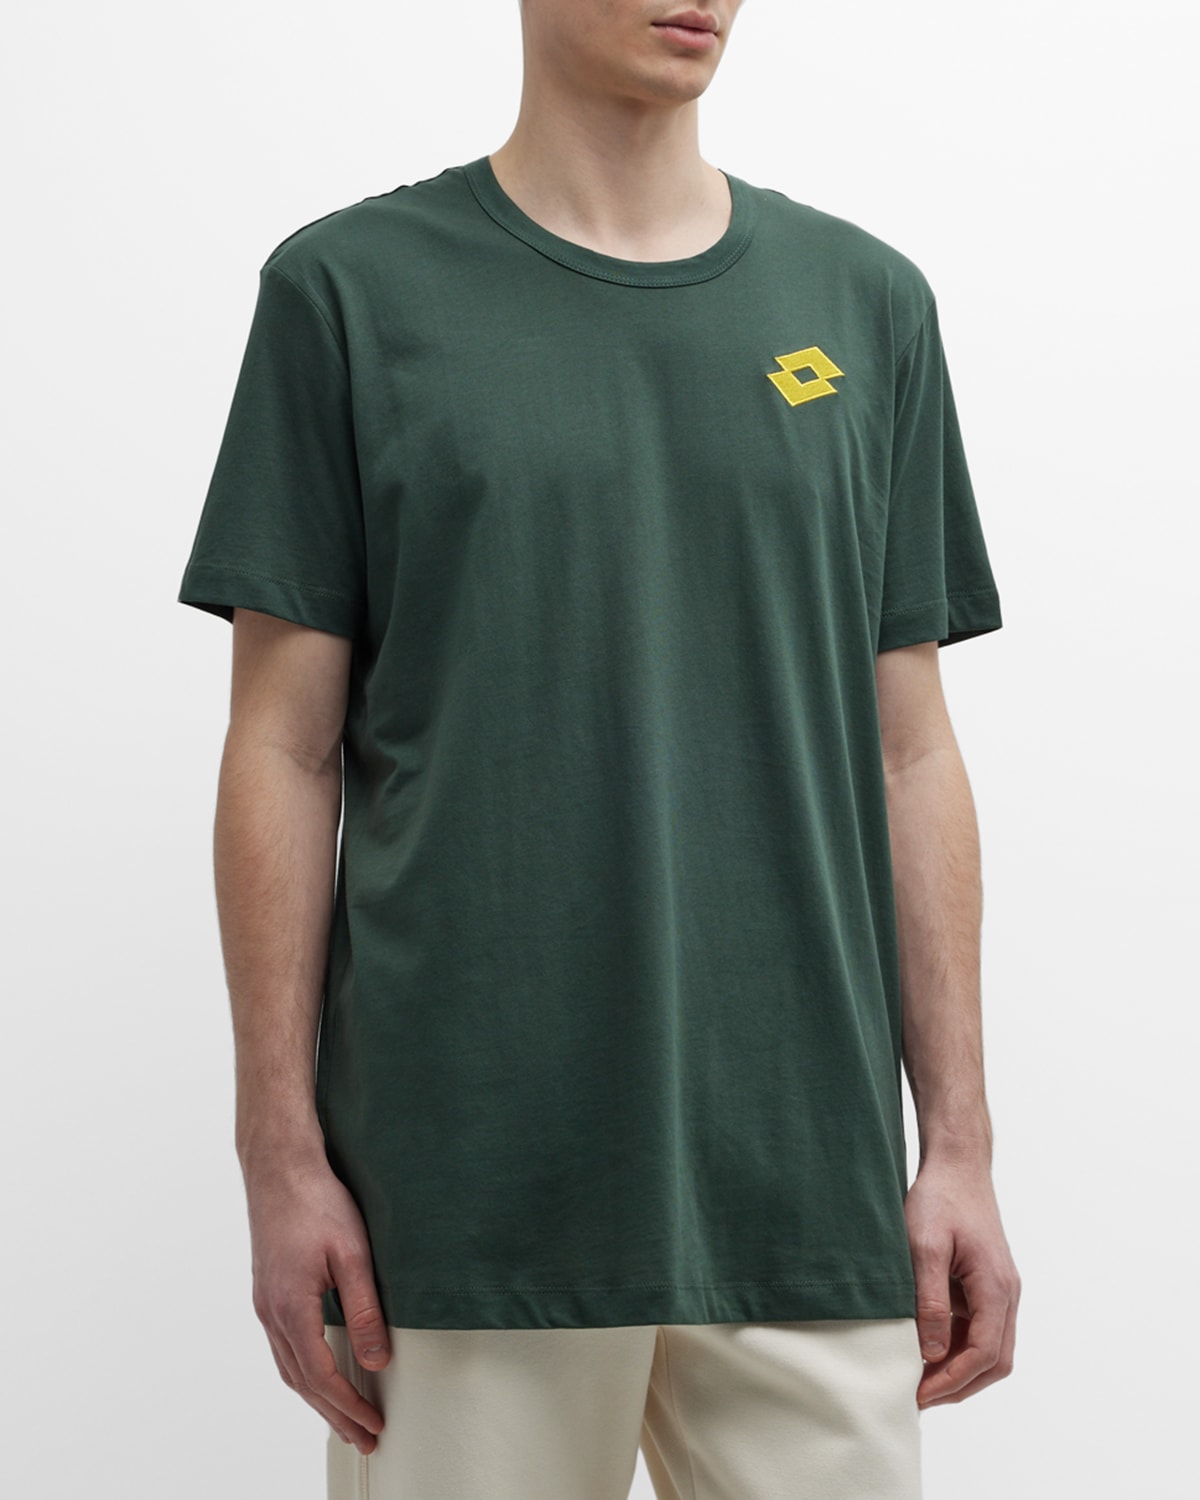 Lotto Italia Men's Number Jersey T-shirt In Olive